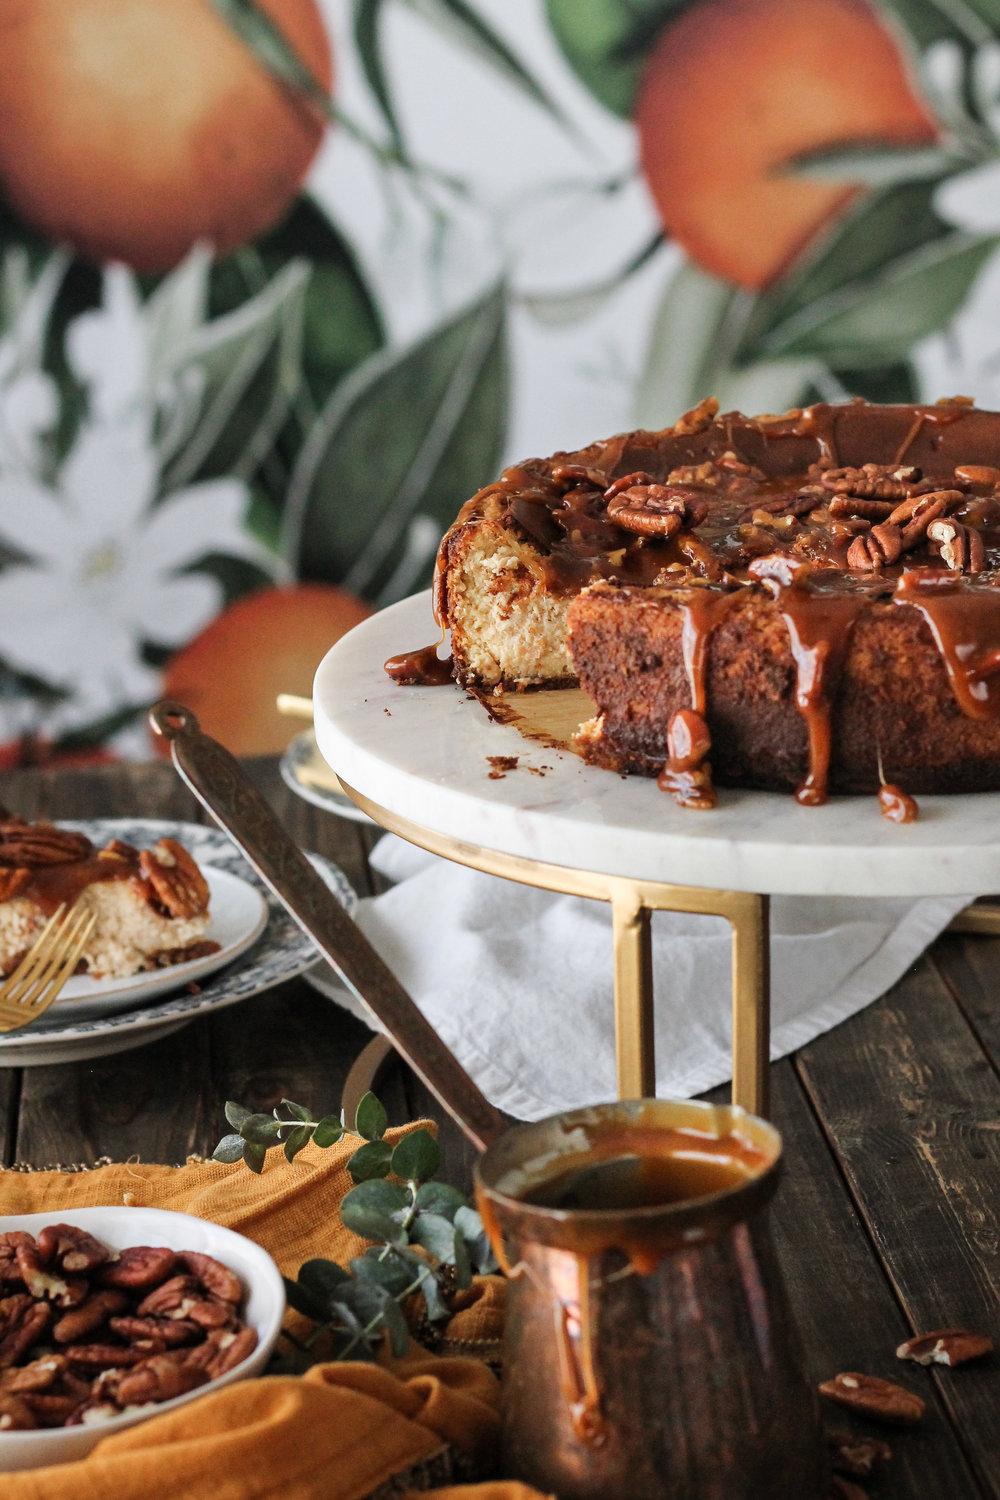 Scoot+over+pumpkin+pie,+this+Maple+Cinnamon+Cheesecake+with+Pecan+Caramel+is+the+ultimate+fall+dessert!+[+www.pedanticfoodie.jpg